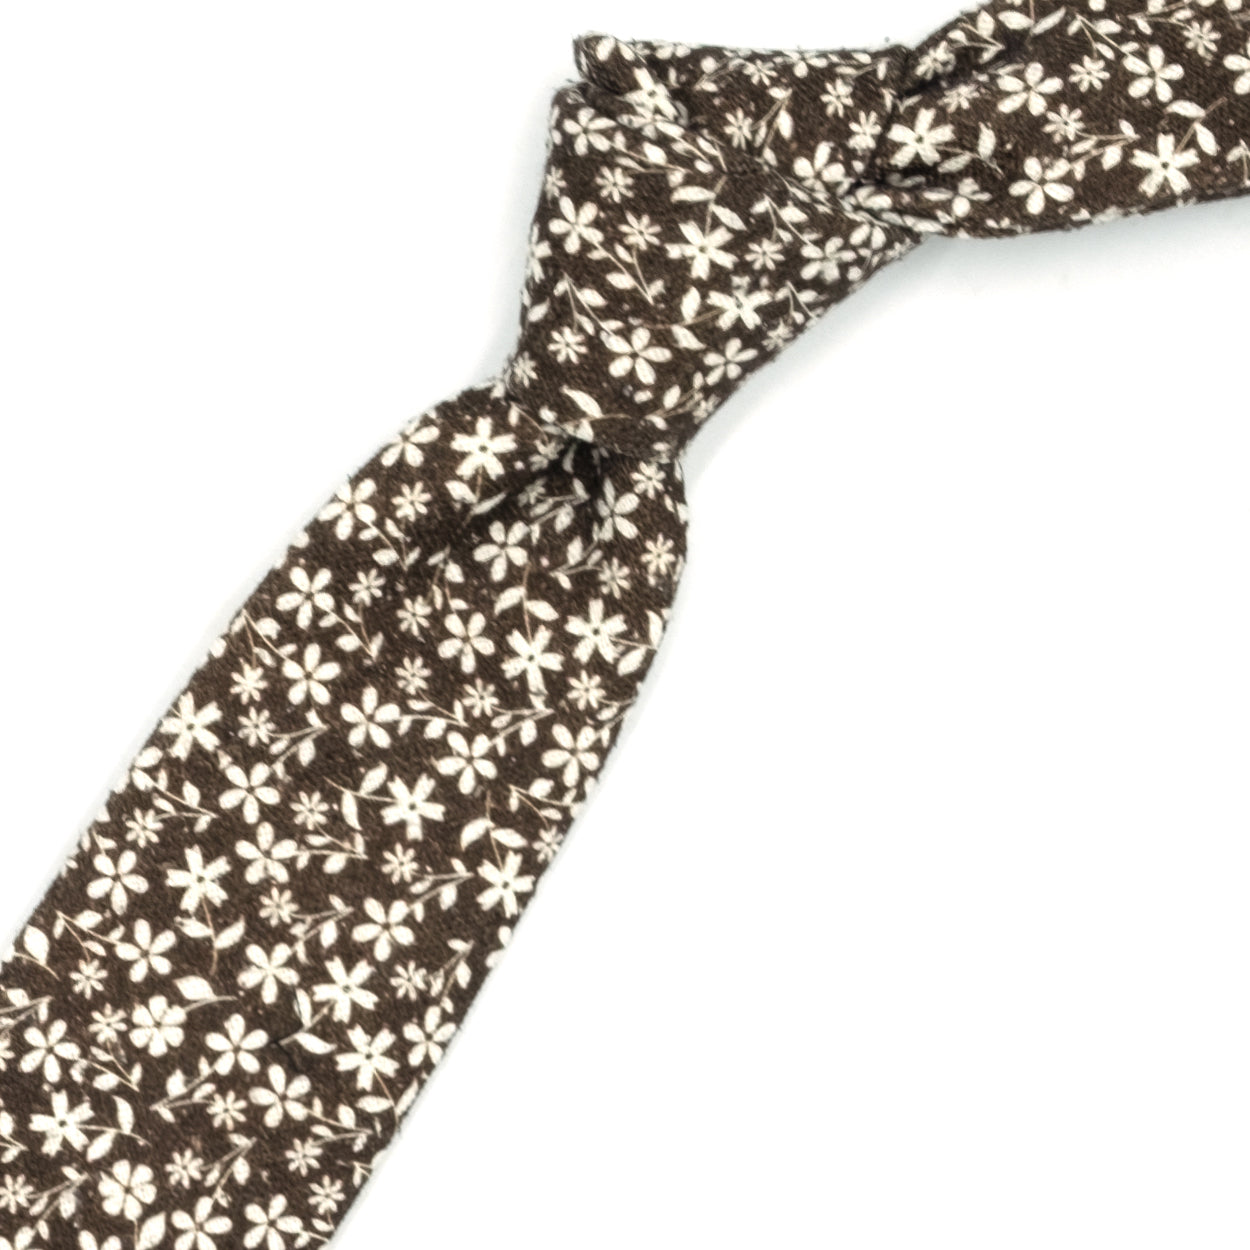 Brown tie with white flowers